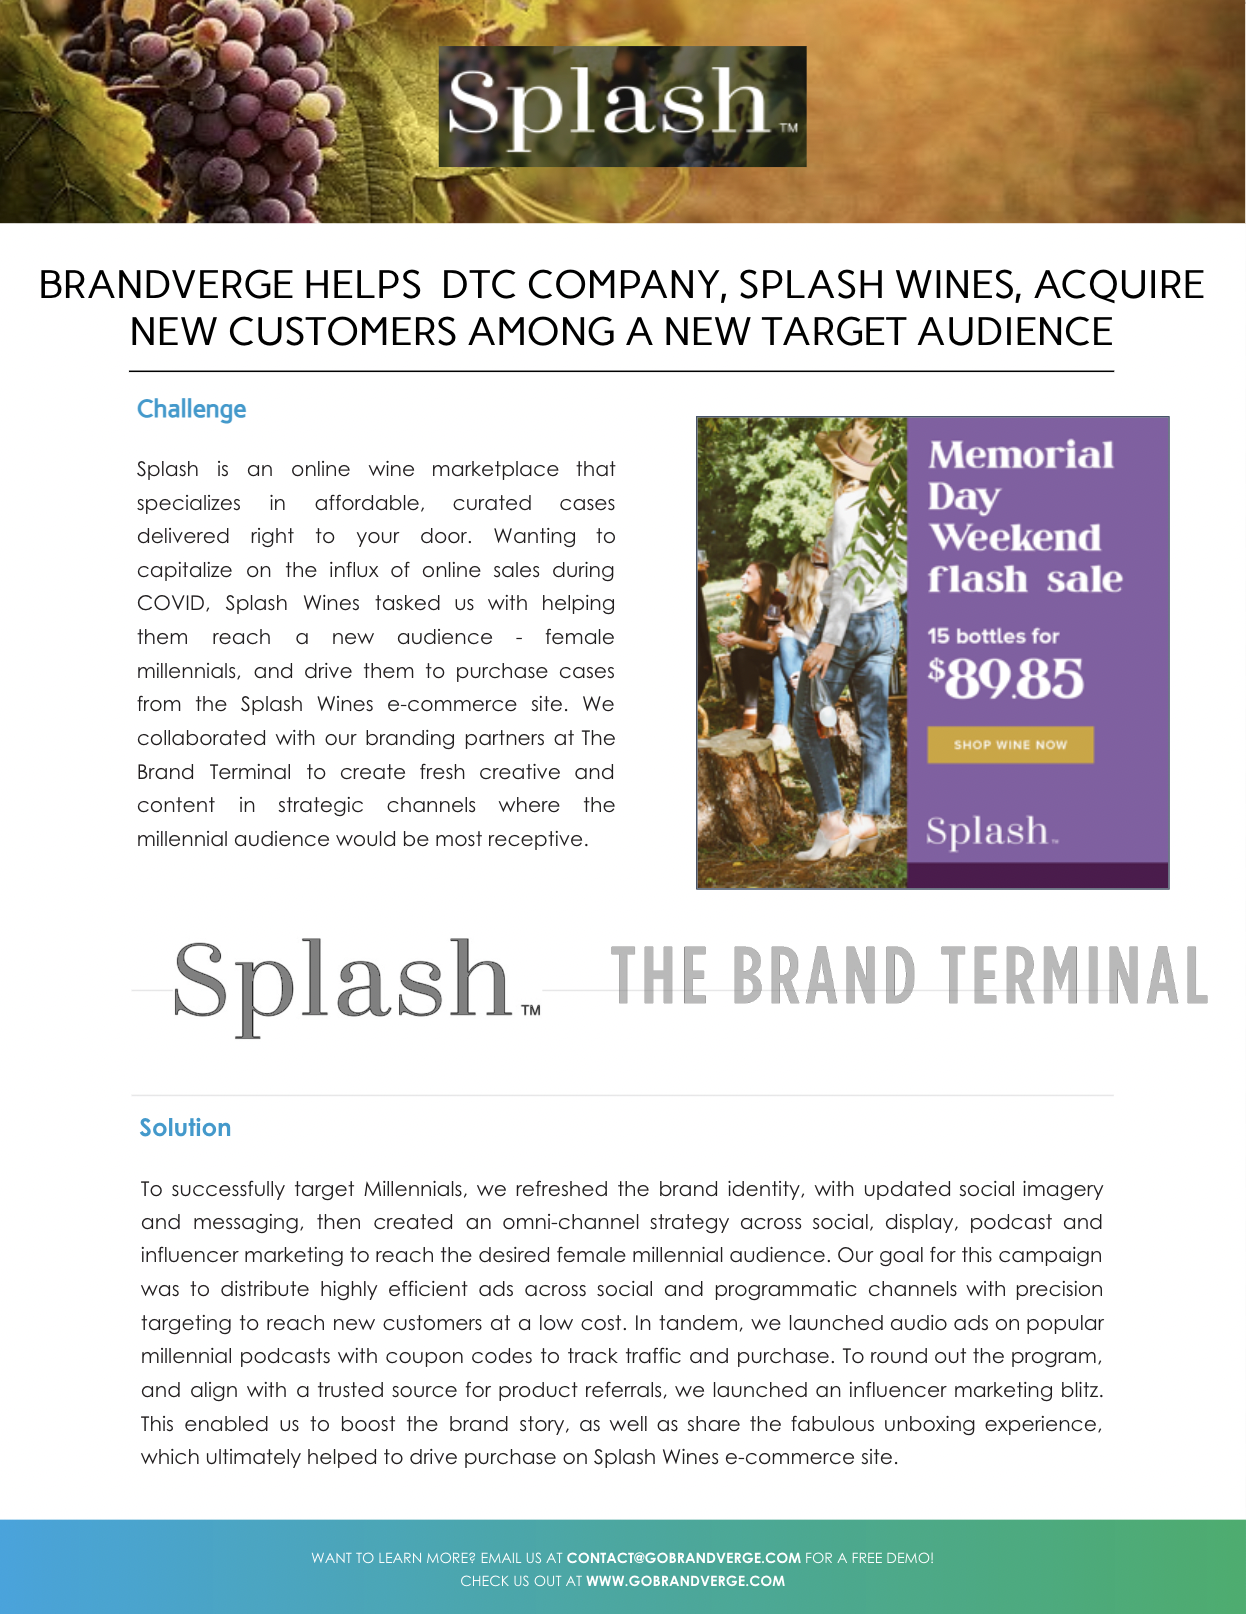 BRANDVERGE HELPS DTC COMPANY, SPLASH WINES, ACQUIRE NEW CUSTOMERS AMONG A NEW TARGET AUDIENCE